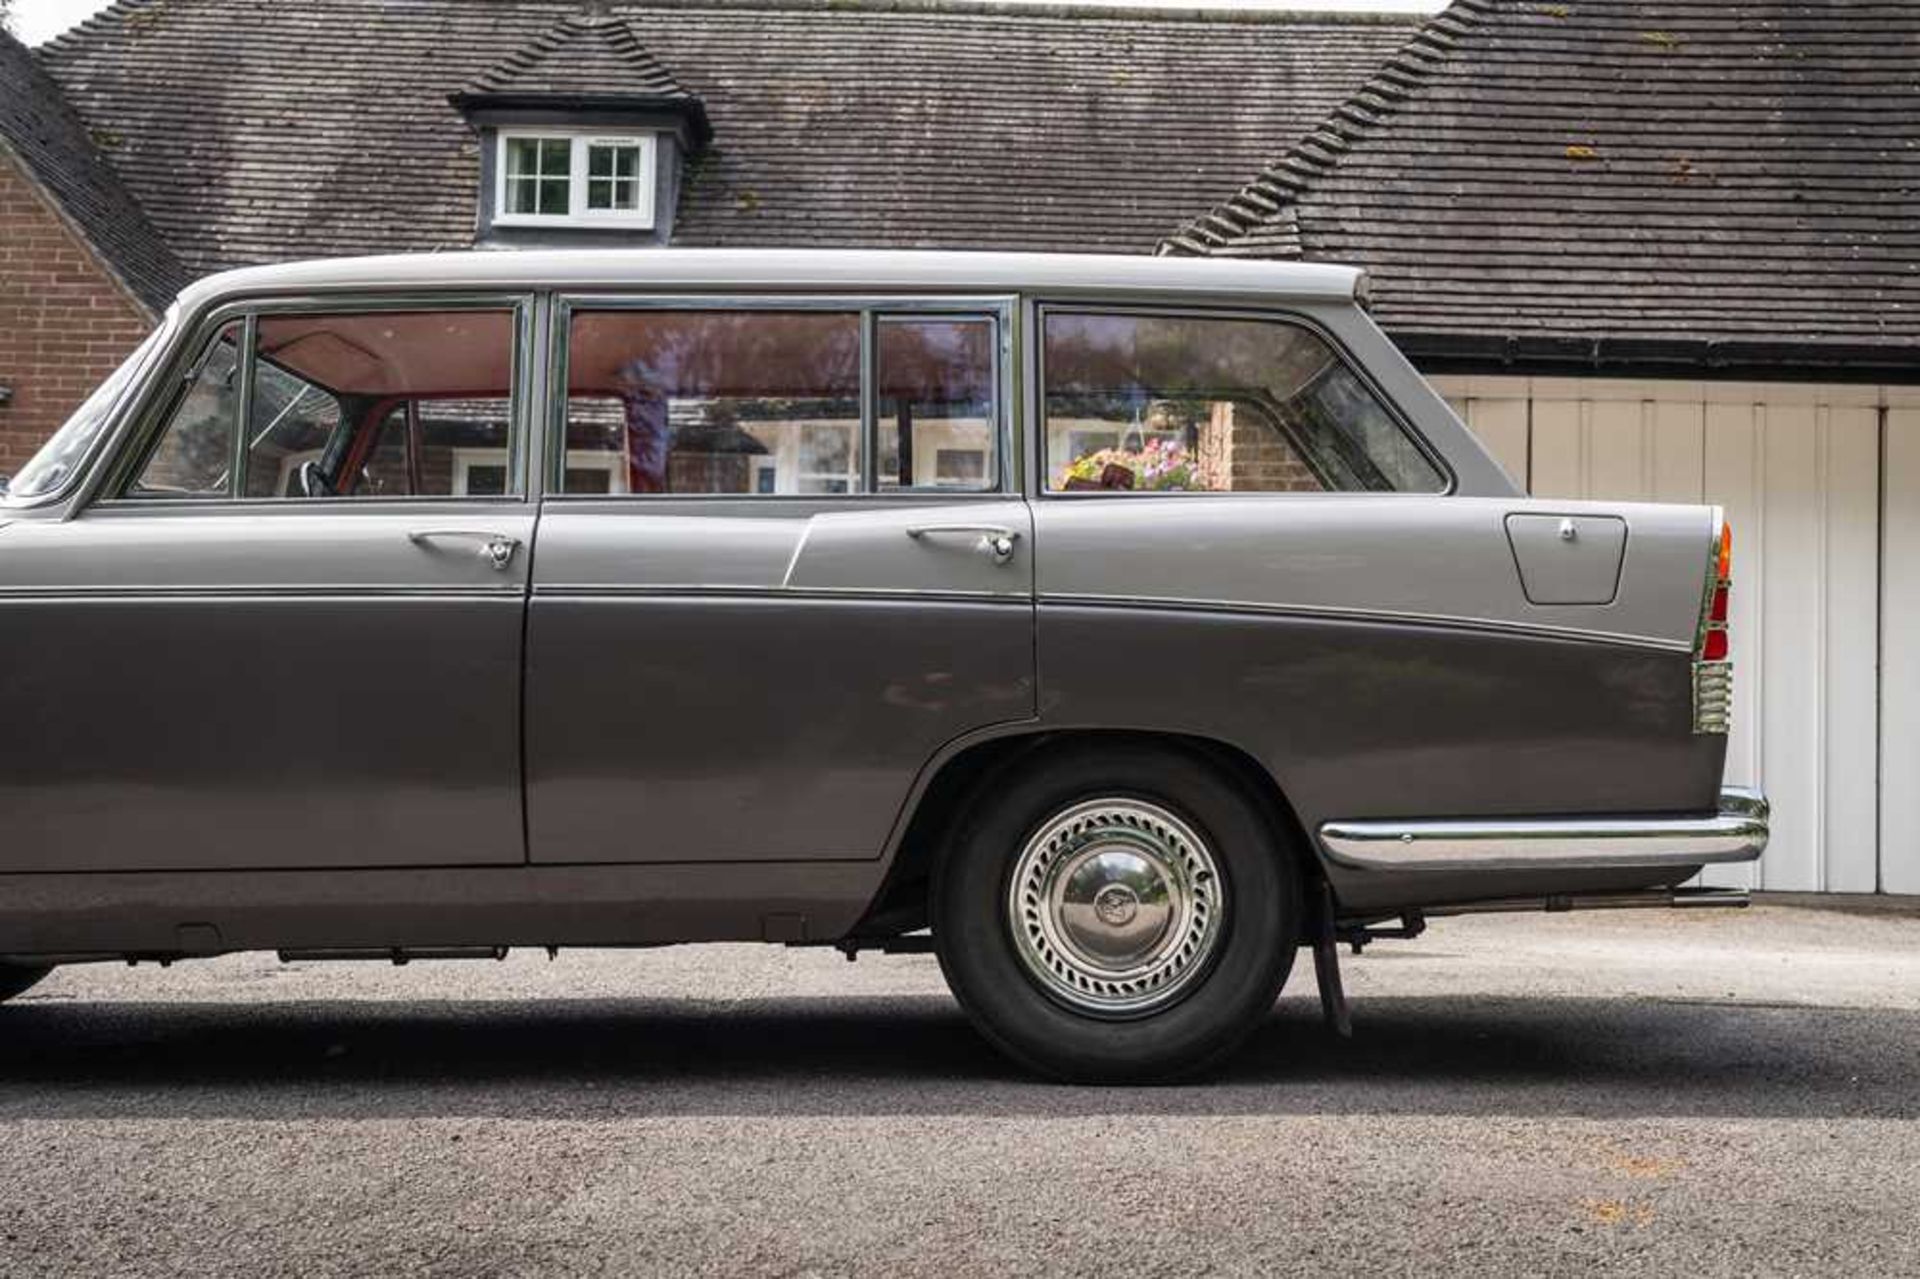 1964 Morris Oxford Series VI Farina Traveller Just 7,000 miles from new - Image 32 of 98